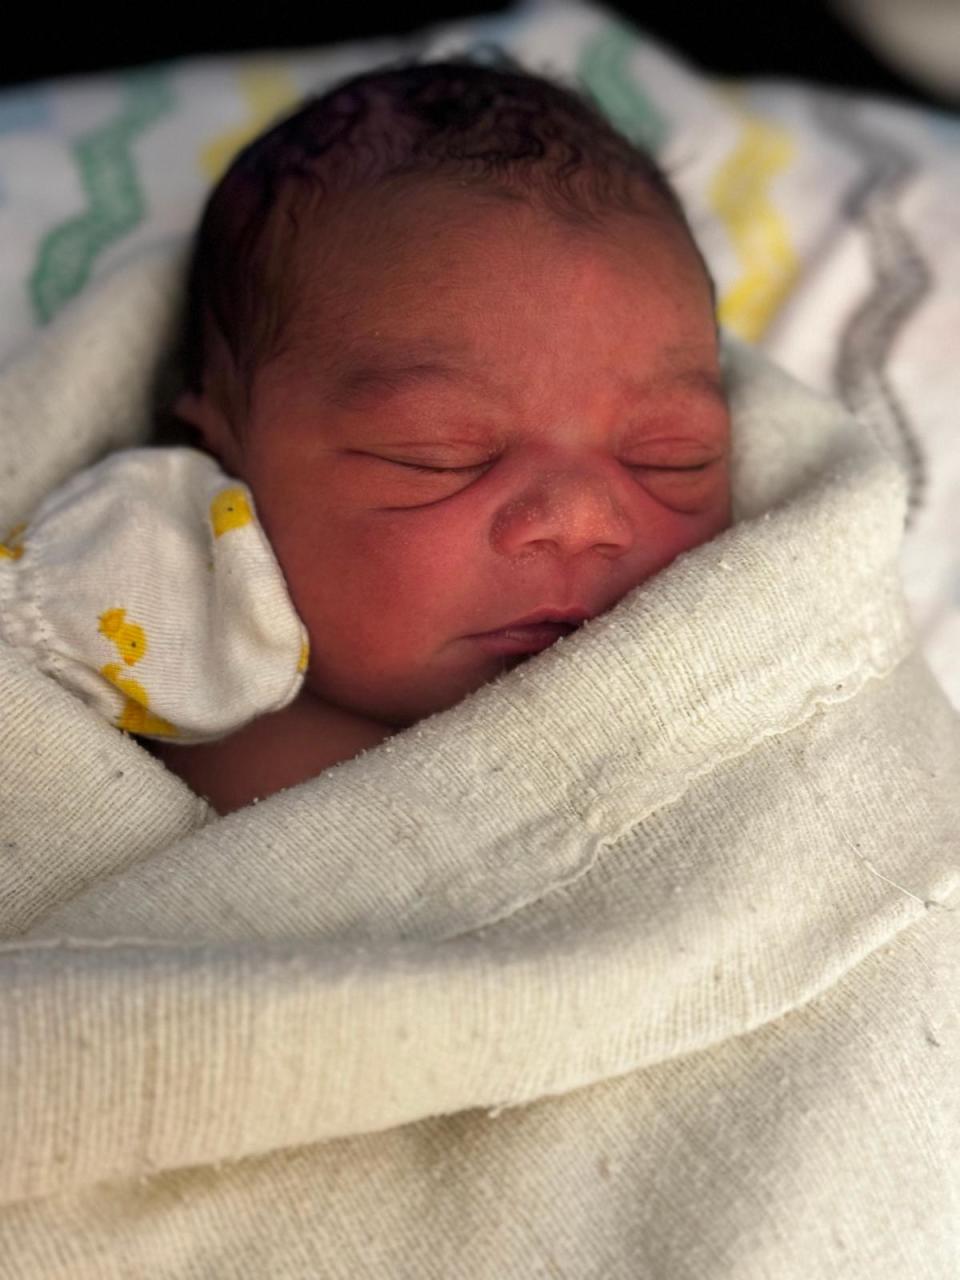 PHOTO: Janai Norman shares a new photo of her third child, a baby boy, who was born in November. (Courtesy Norman family)